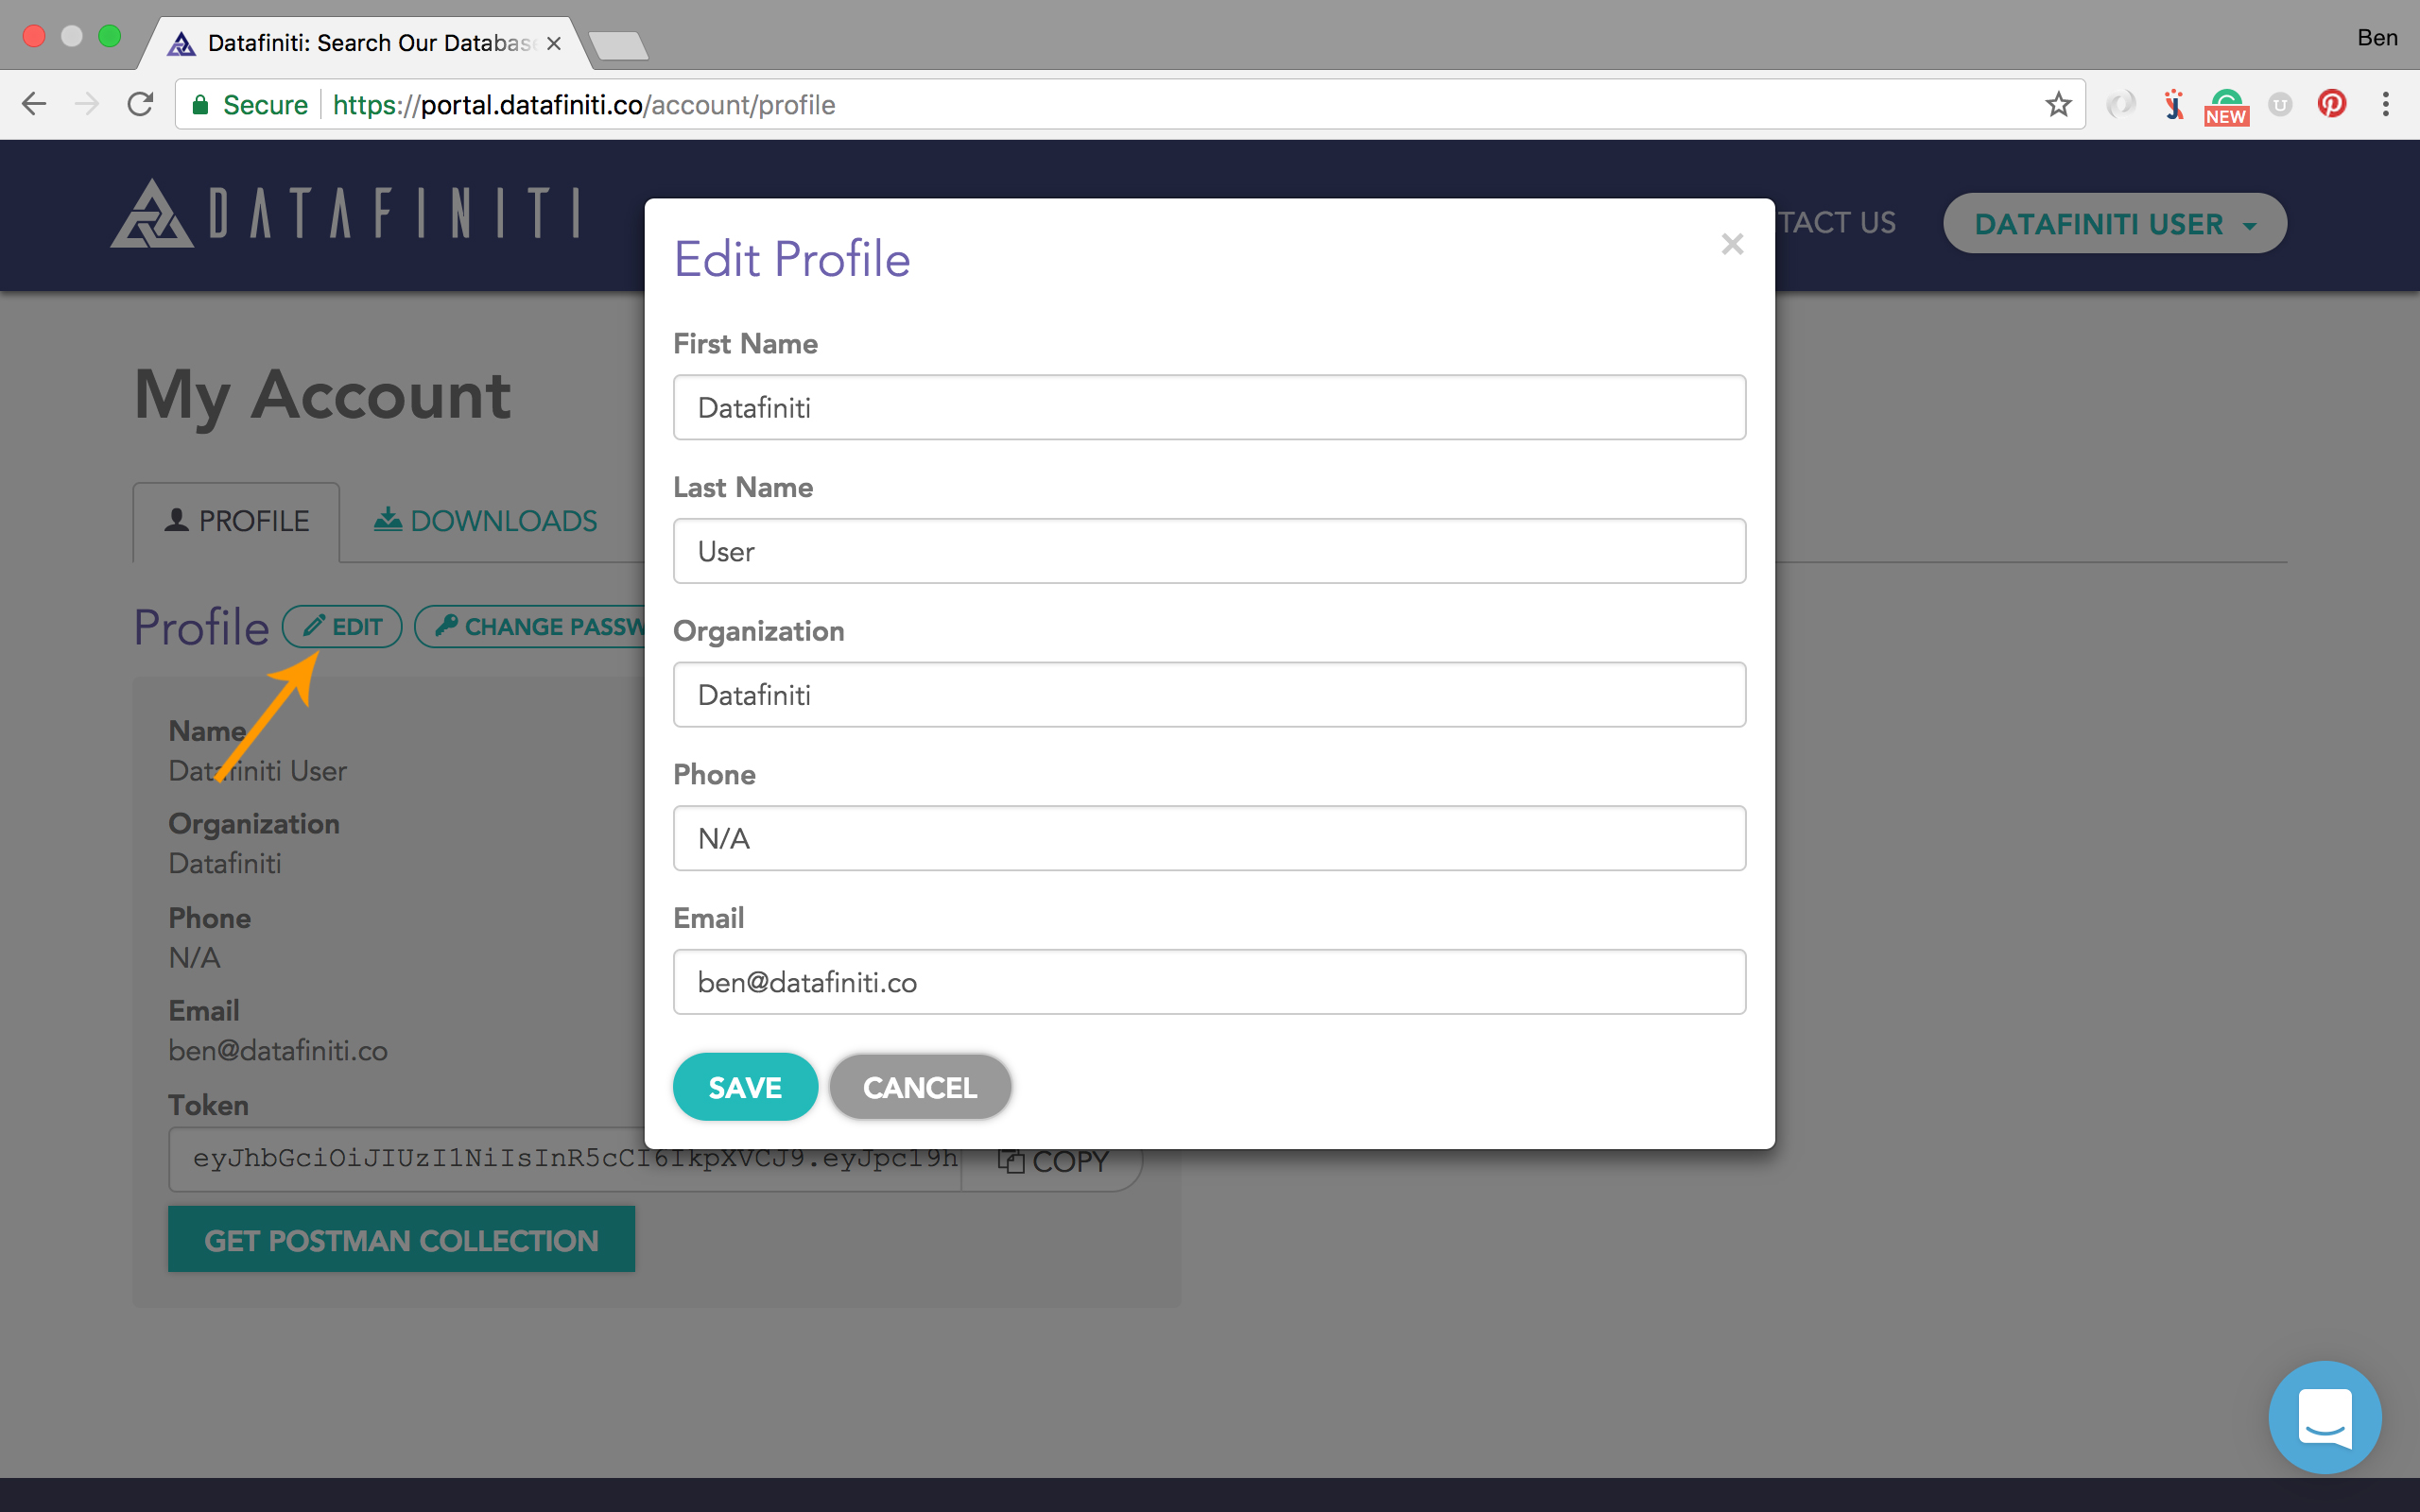 From this page, you can edit your profile details.